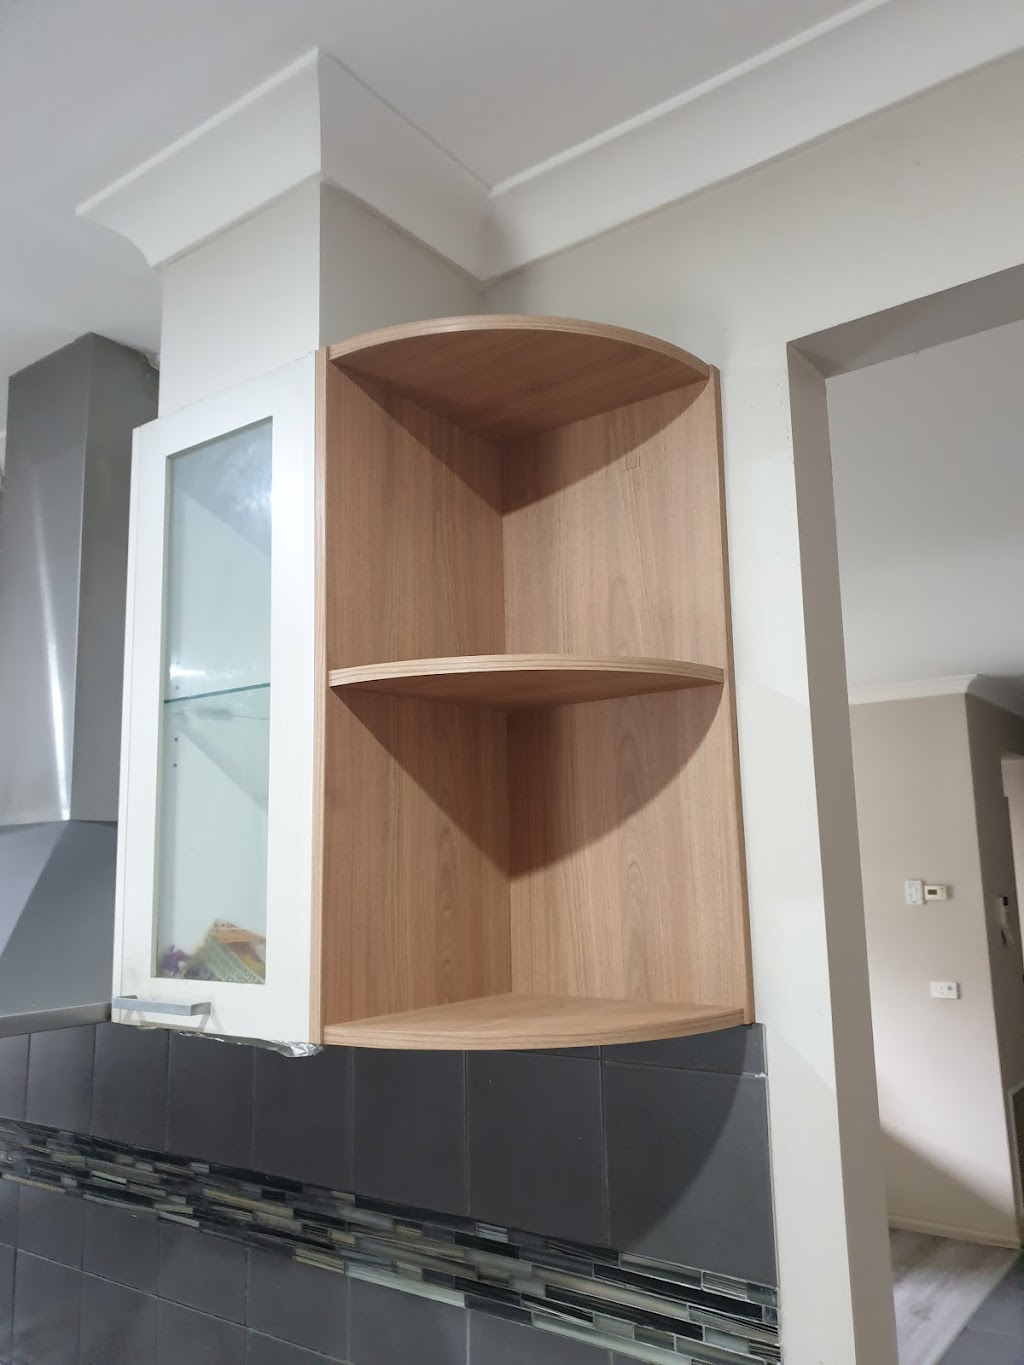 First point cabinets | point of interest | 3 Haniper Grv, Werribee VIC 3030, Australia | 0430104533 OR +61 430 104 533